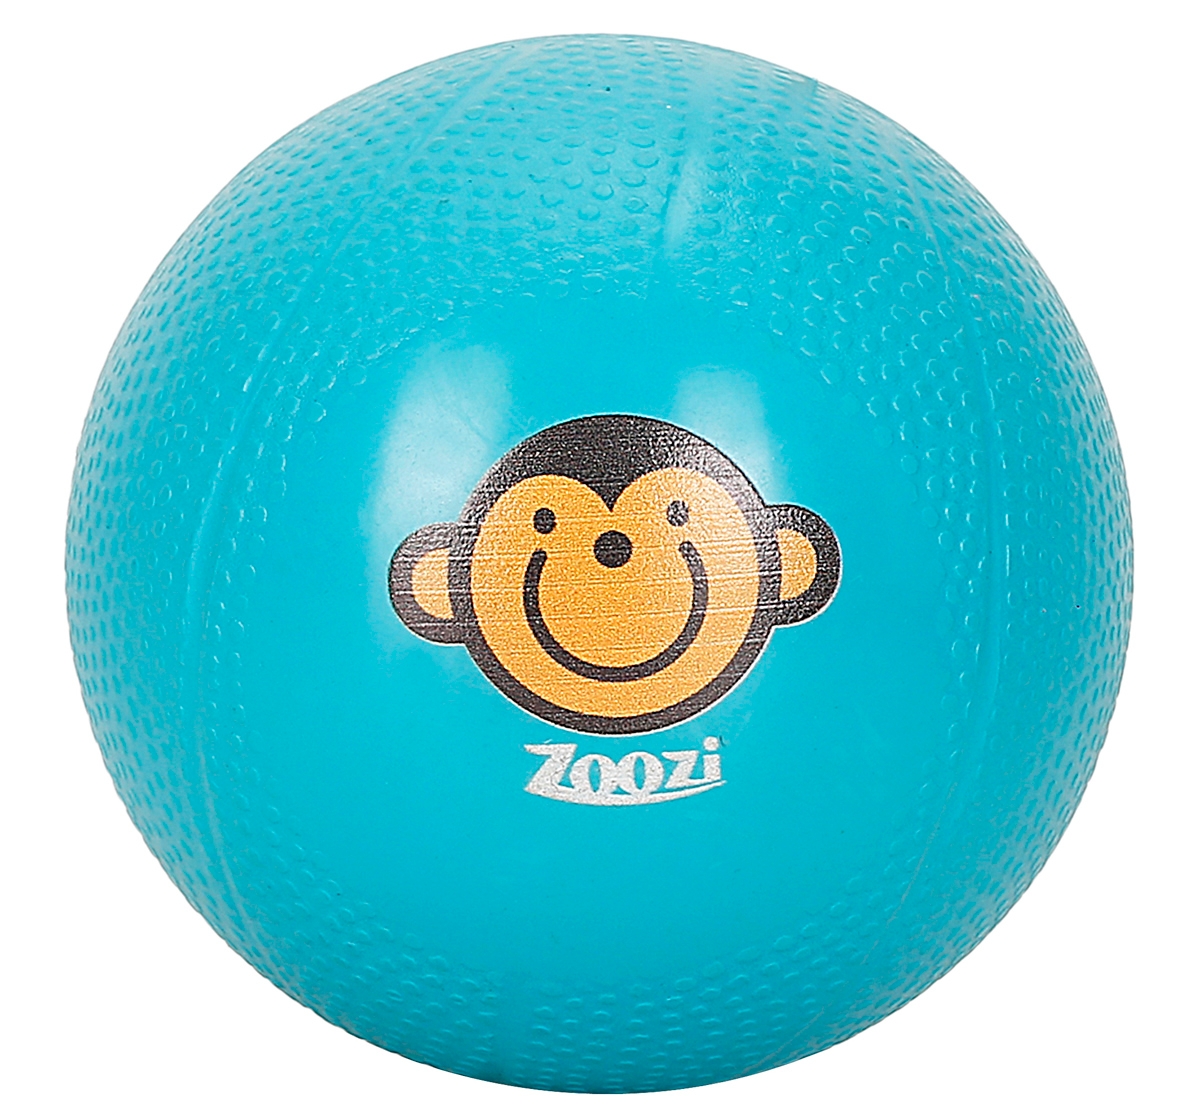 Zoozi 5.5 Inch Scented Ball Monkey for kids 3Y+, Blue